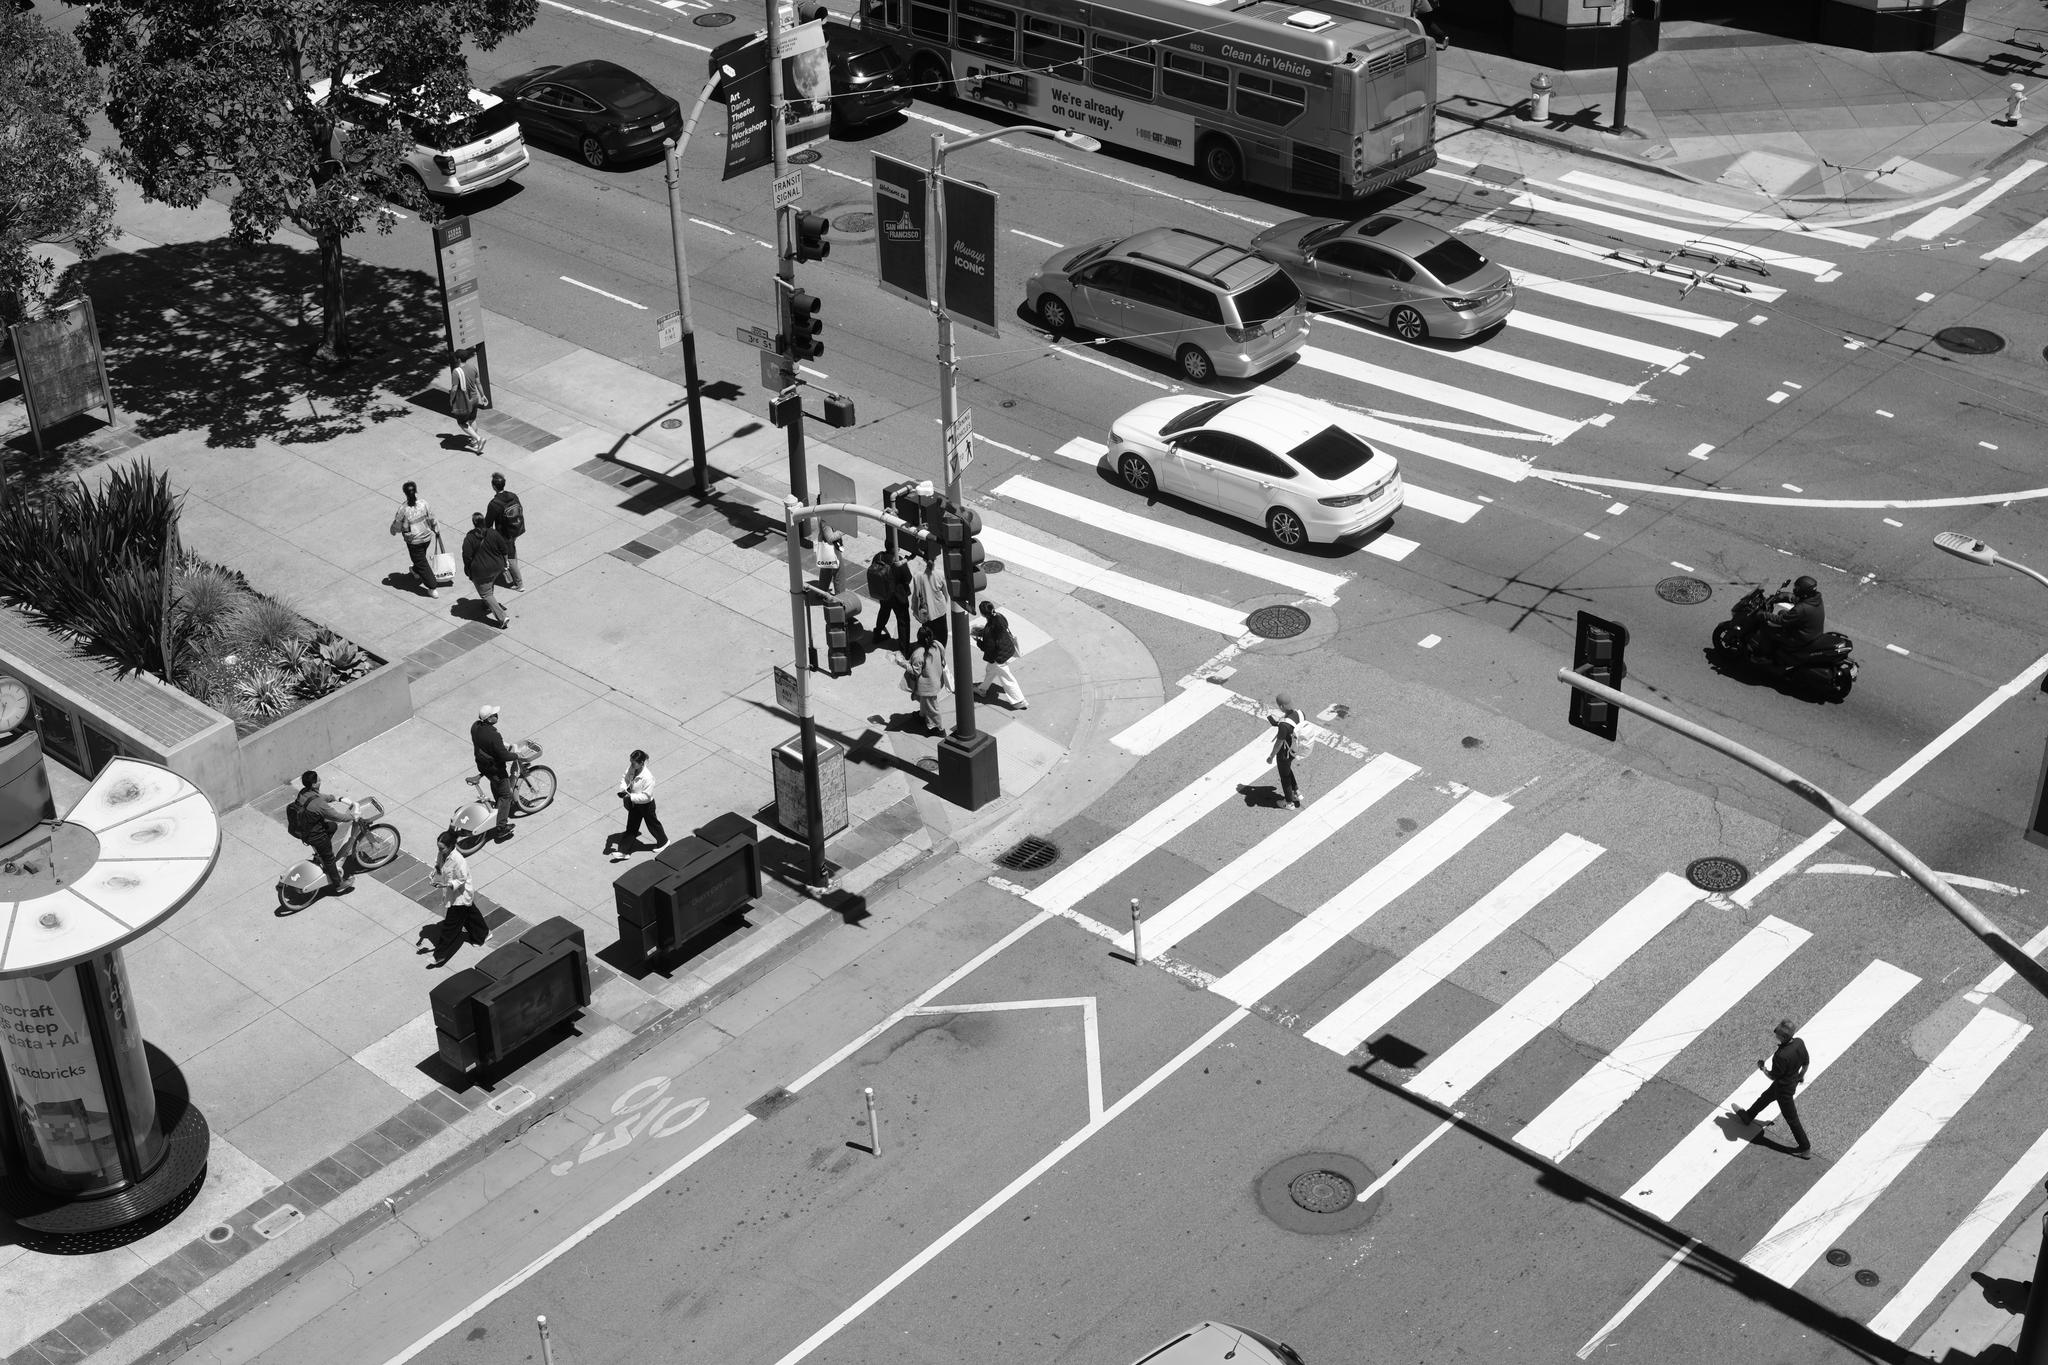 A busy urban intersection with pedestrians crossing the street and vehicles, including a bus, navigating the roads